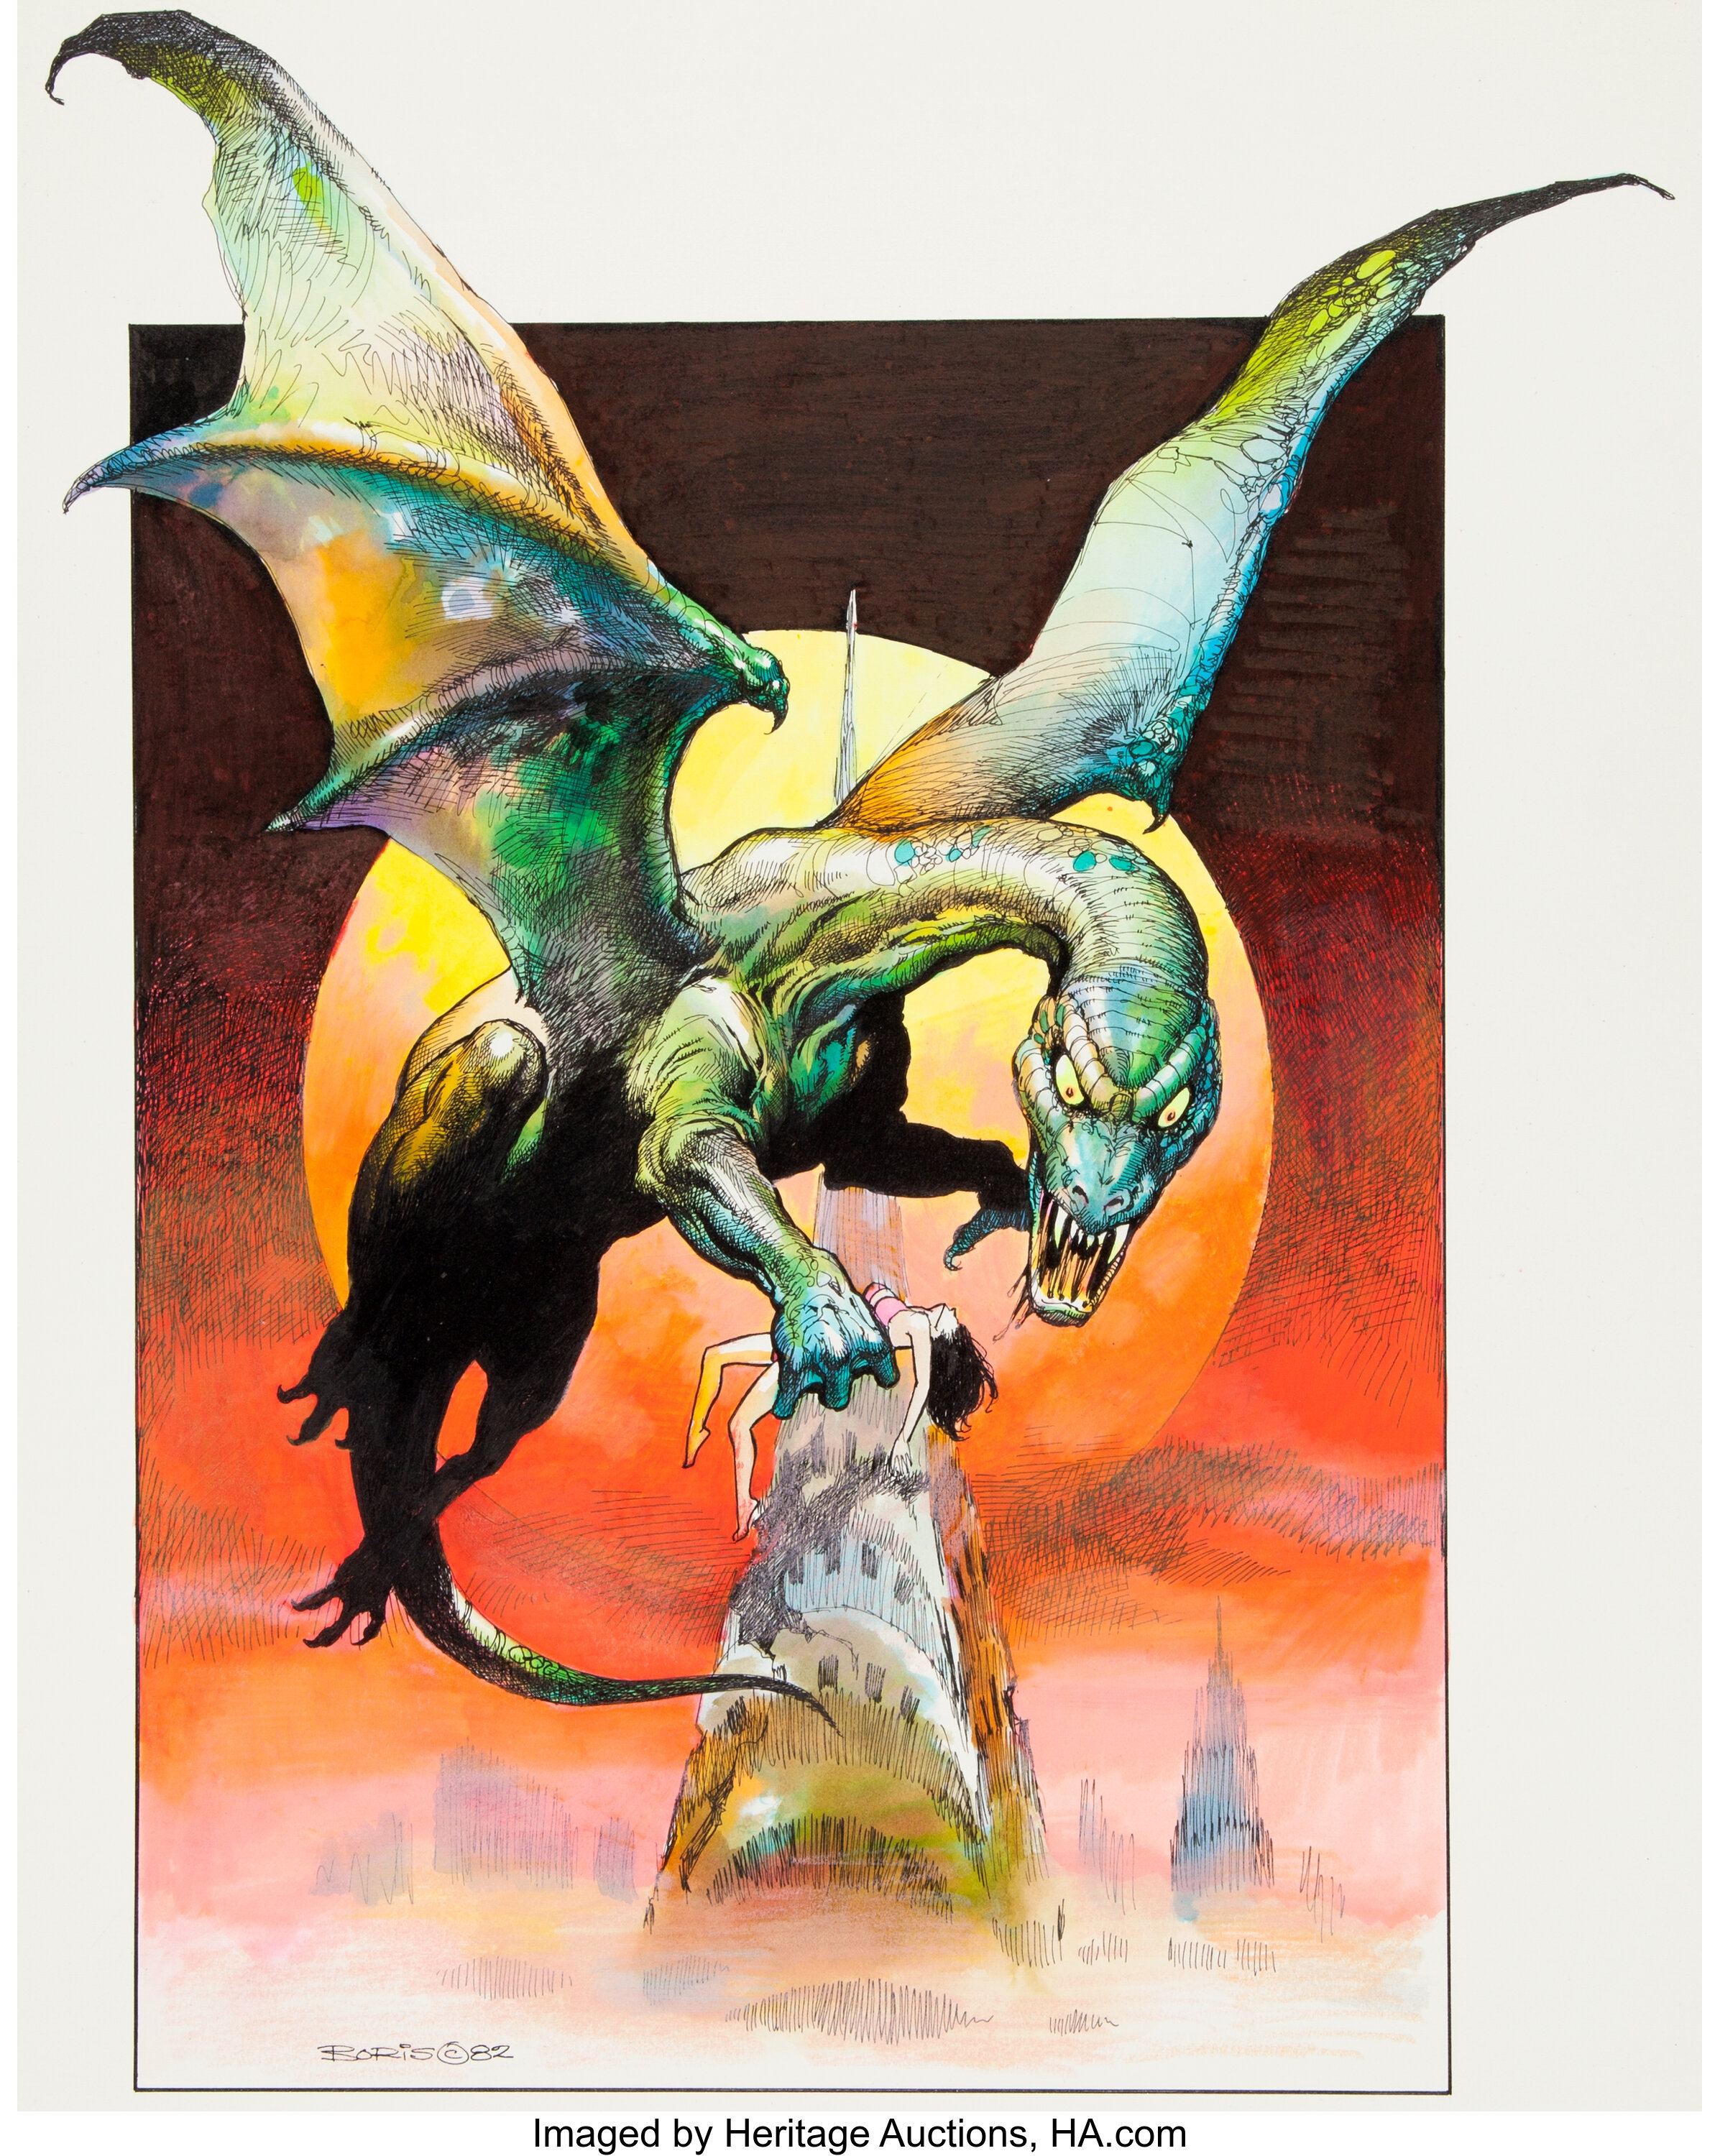 Boris Vallejo Q, The Winged Serpent Movie Poster Study Painting | Lot ...